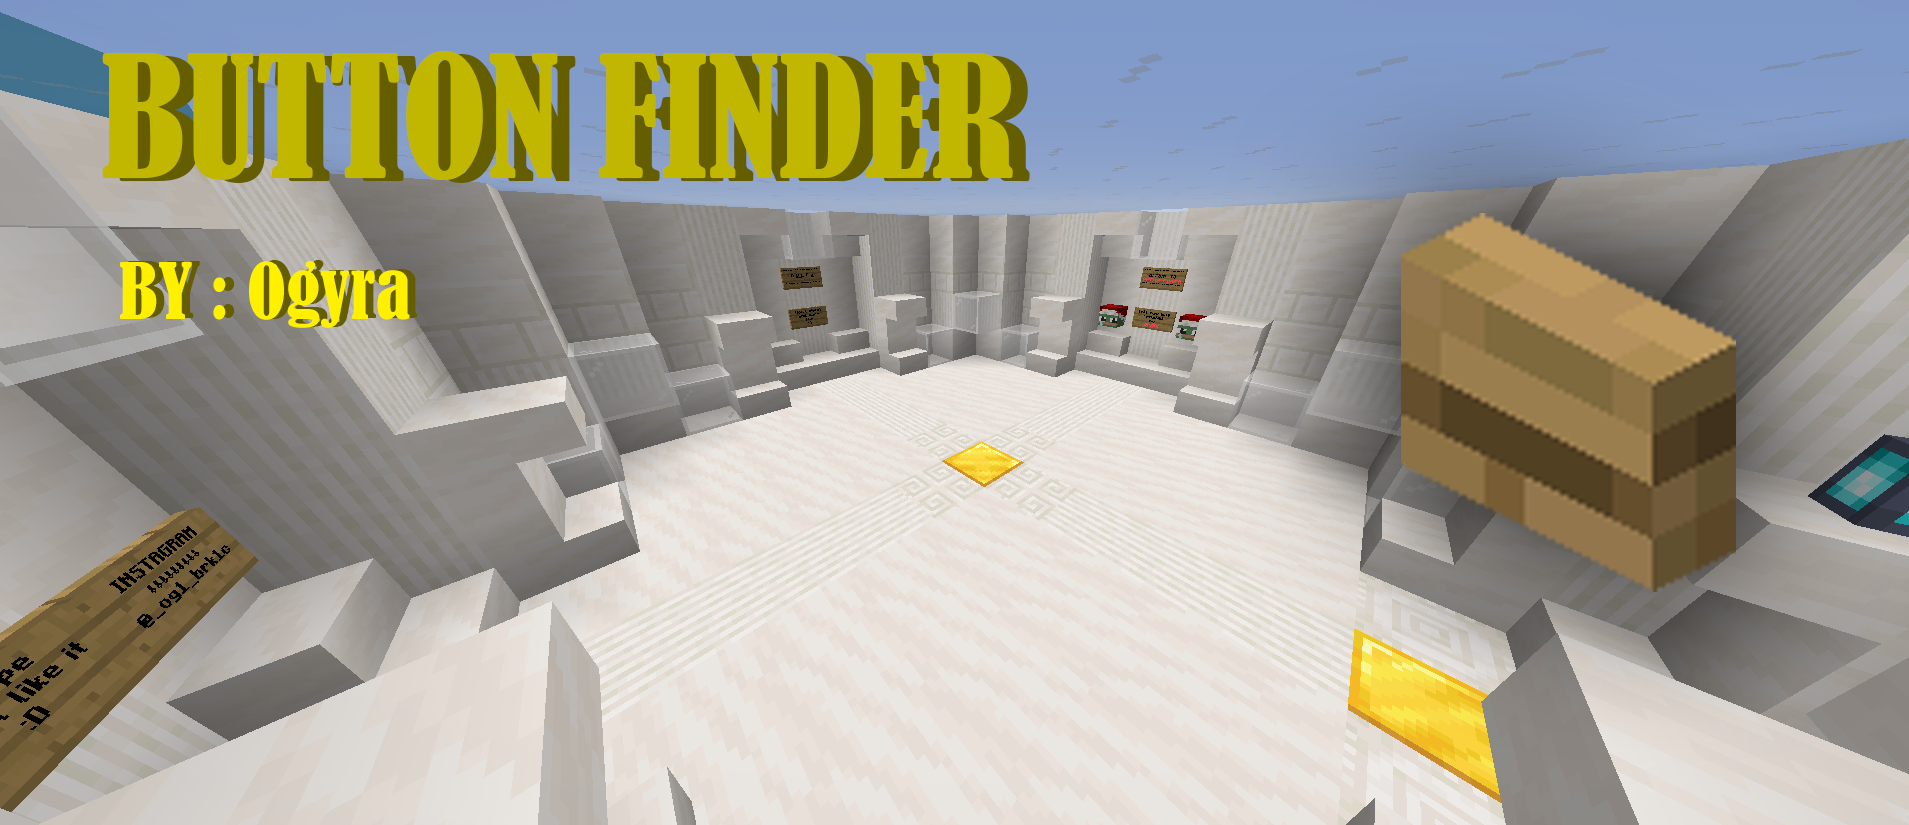 Download The Button Finder for Minecraft 1.16.3